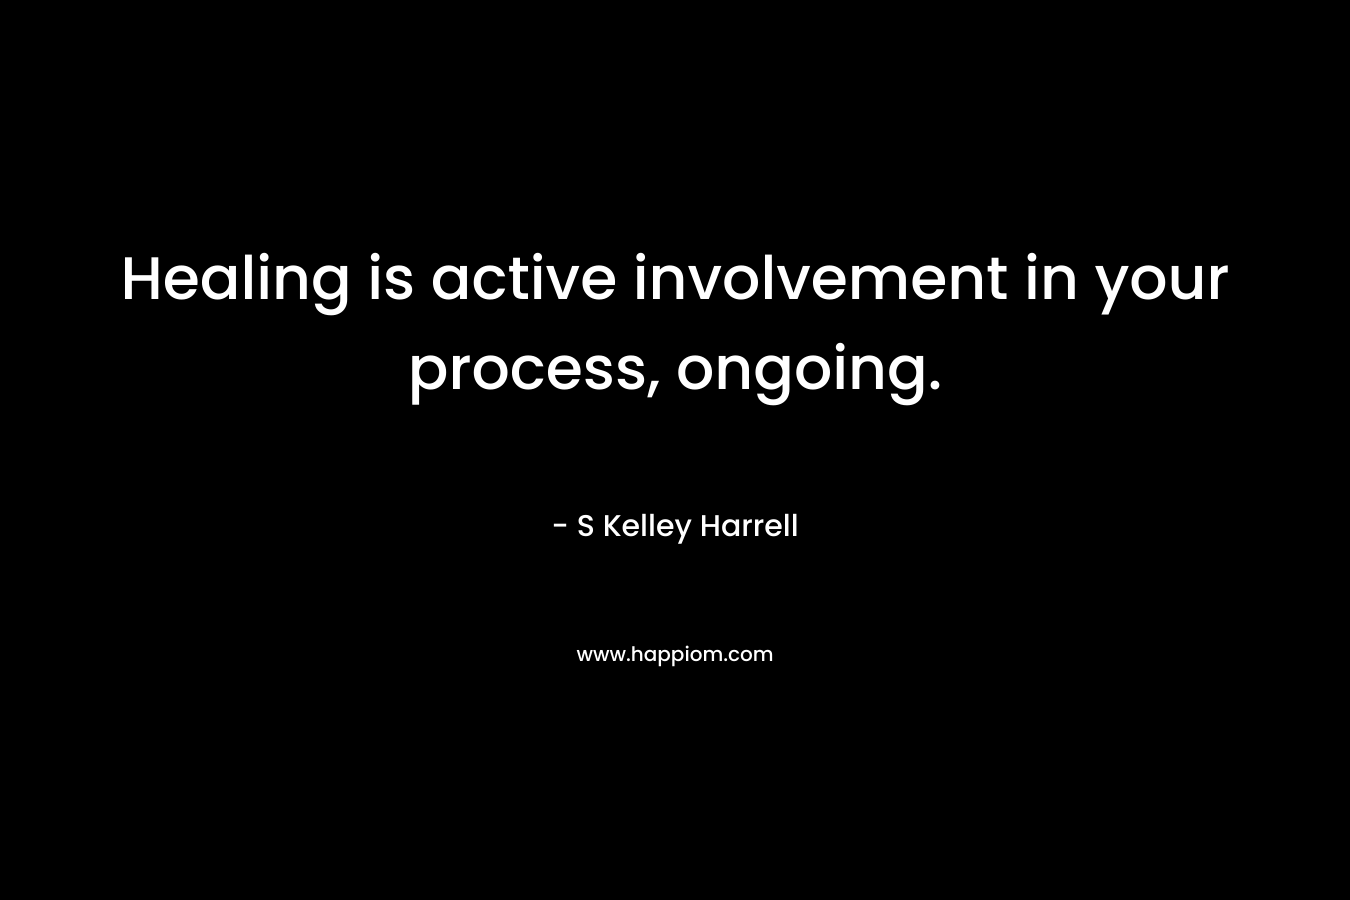 Healing is active involvement in your process, ongoing. – S Kelley Harrell